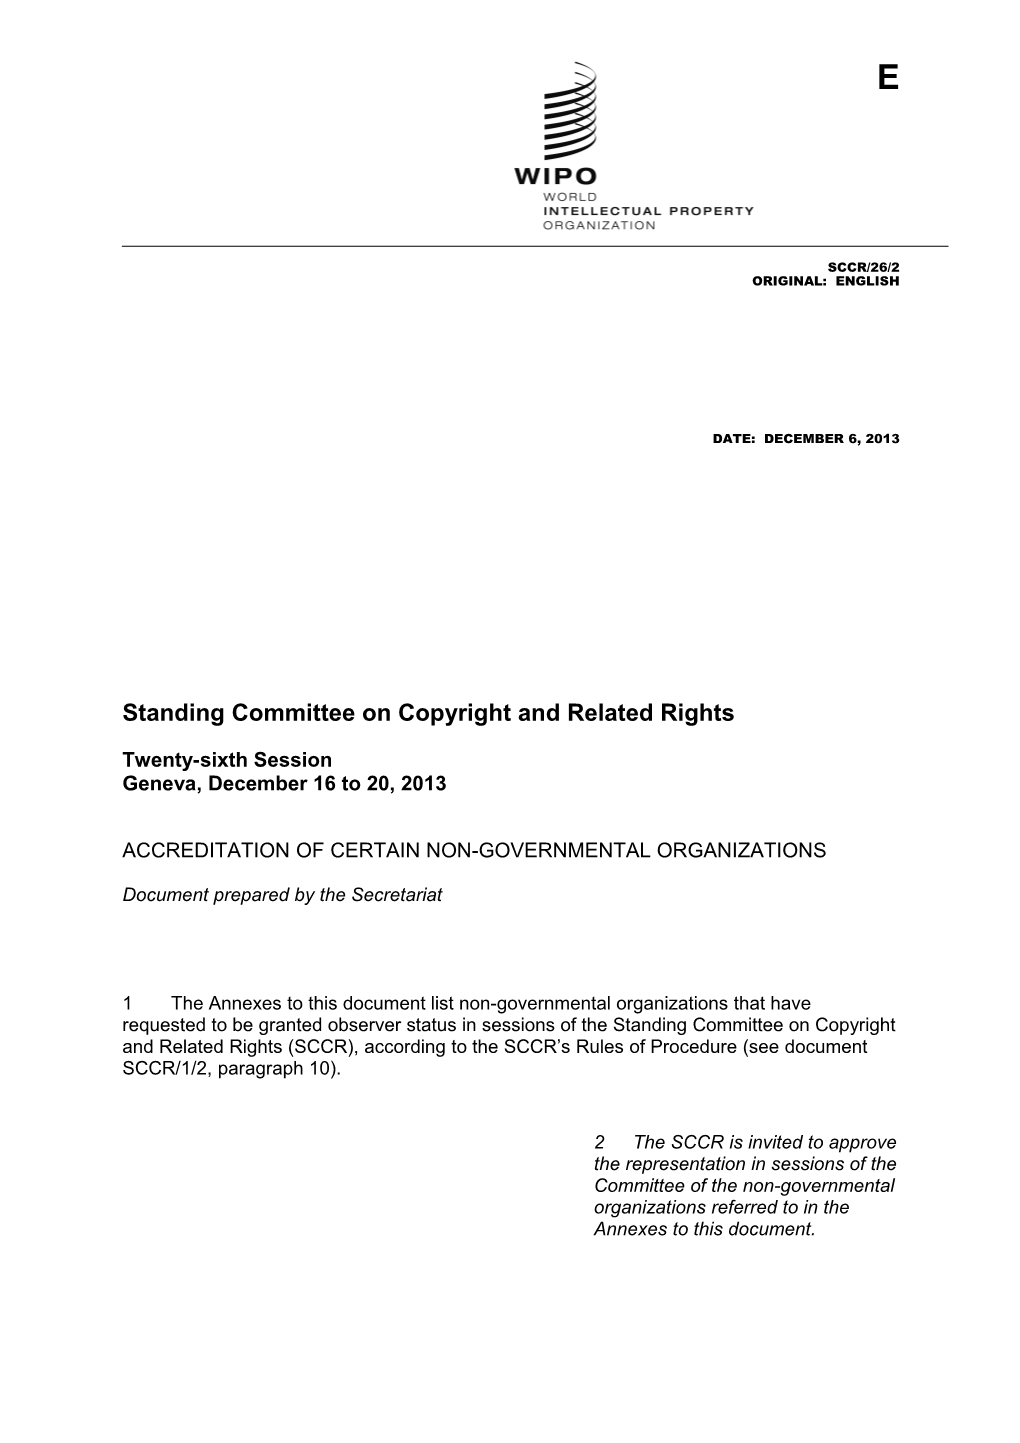 Standing Committee on Copyright and Related Rights s1